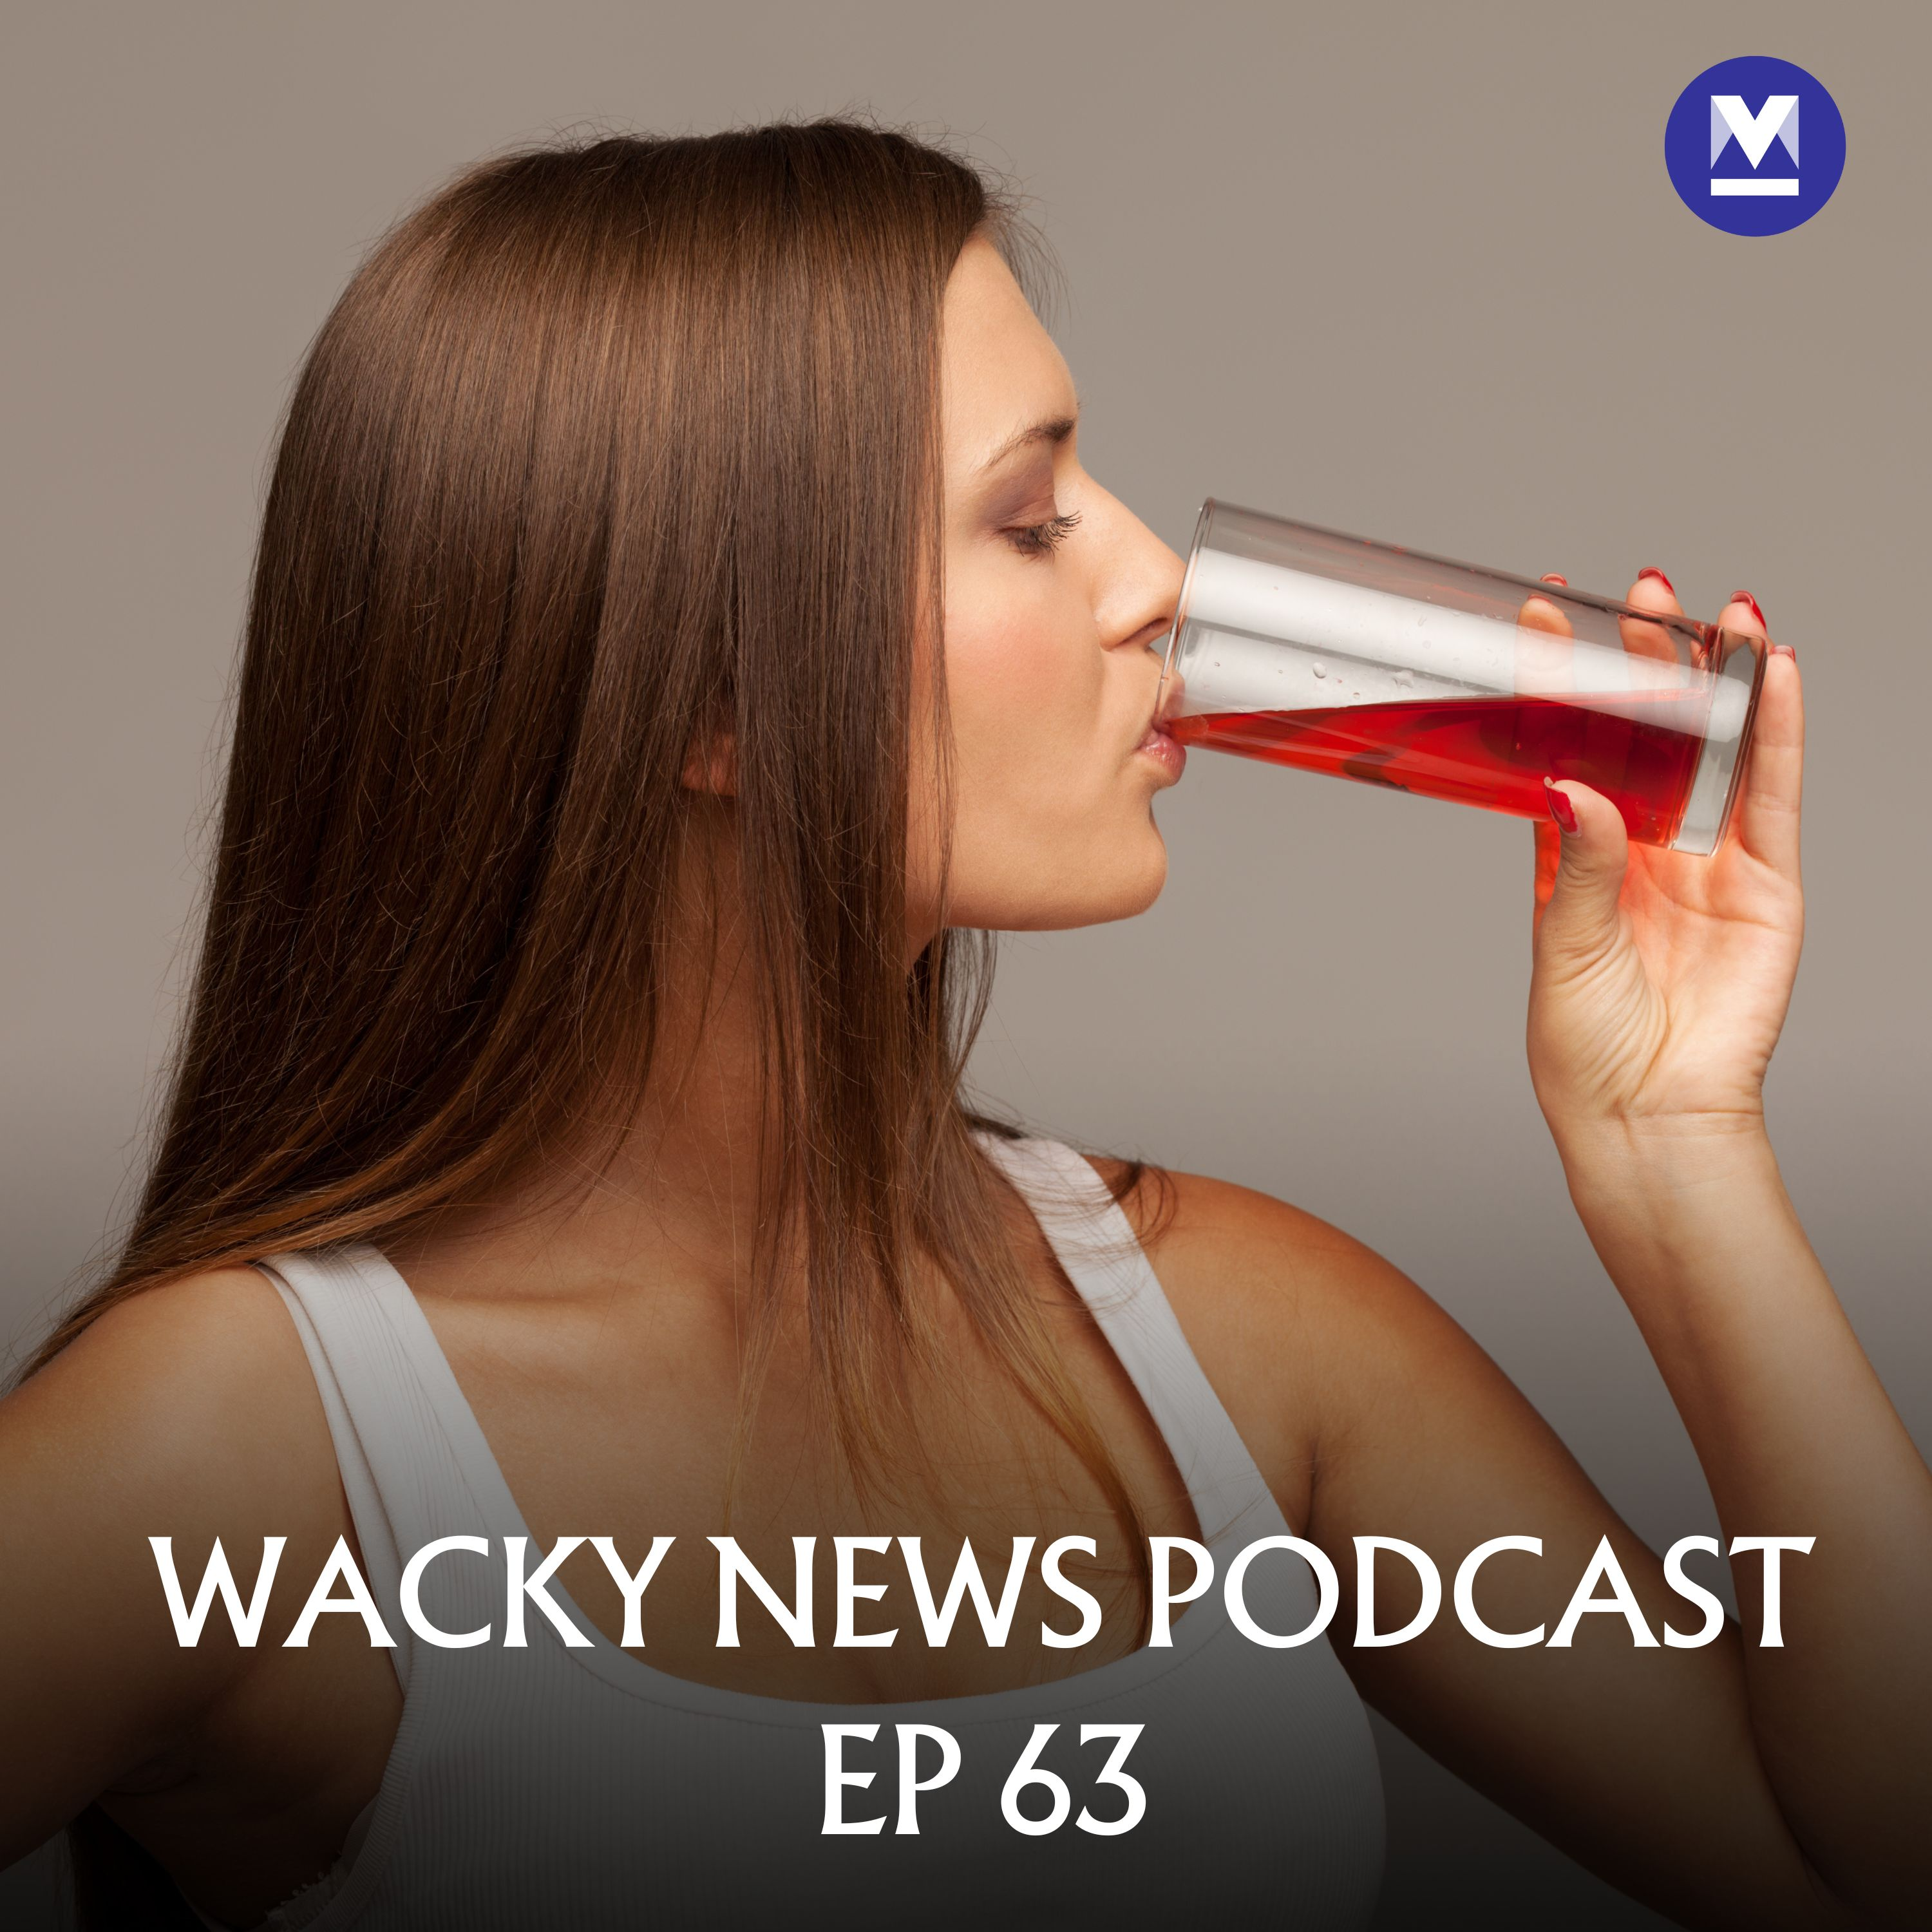 Wacky News: Crocodile blood drink that cures infertility and 100-hour nonstop cooking | Ep 63